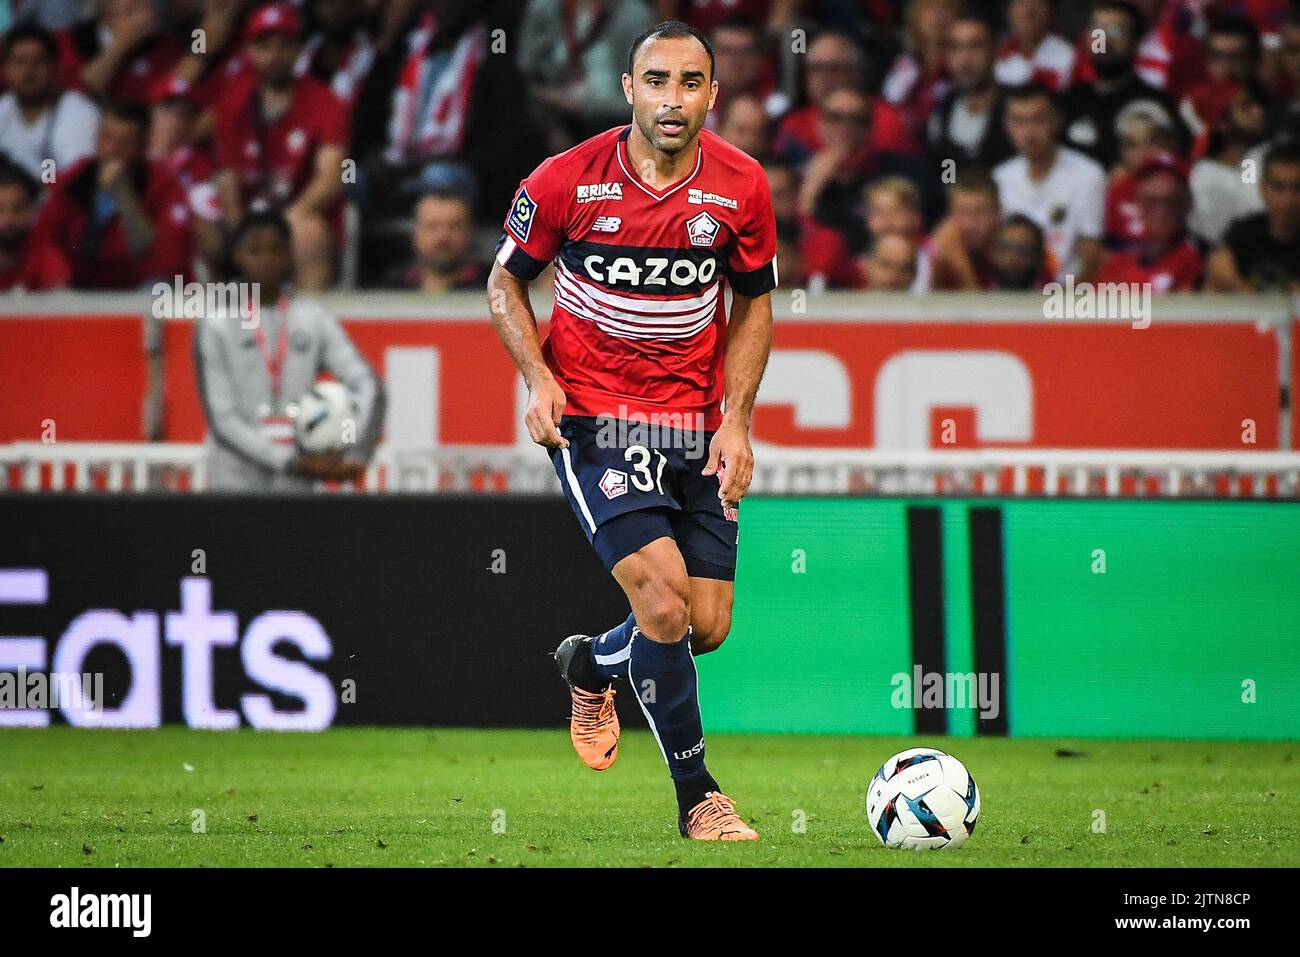 Lille, France - 31/08/2022, Ismaily GONCALVES DOS SANTOS of Lille during the French championship Ligue 1 football match between LOSC Lille and OGC Nice on August 31, 2022 at Pierre Mauroy stadium in Villeneuve-d'Ascq near Lille, France - Photo: Matthieu Mirville/DPPI/LiveMedia Stock Photo